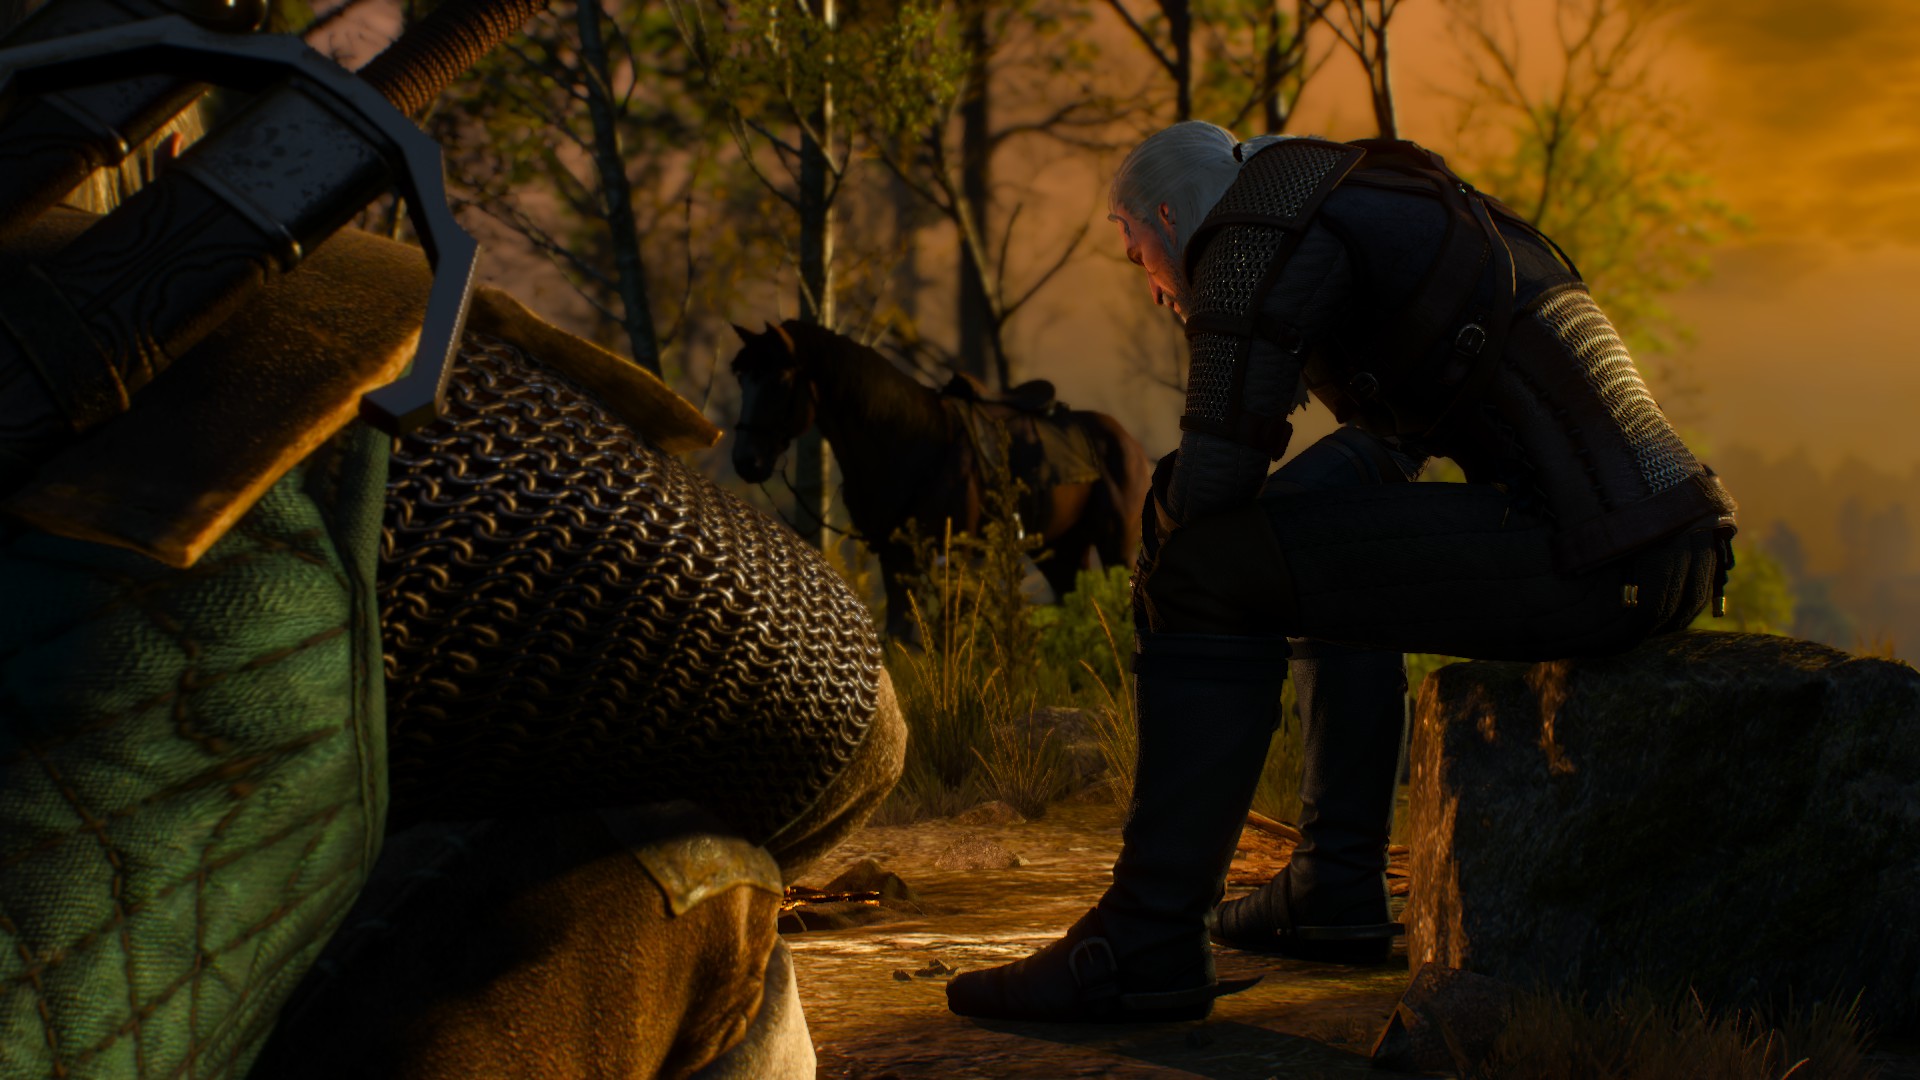 General 1920x1080 The Witcher 3: Wild Hunt Geralt of Rivia Roach Vesemir CD Projekt RED Book characters sitting video game characters CGI video games leaning video game art screen shot horse animals trees video game men sword